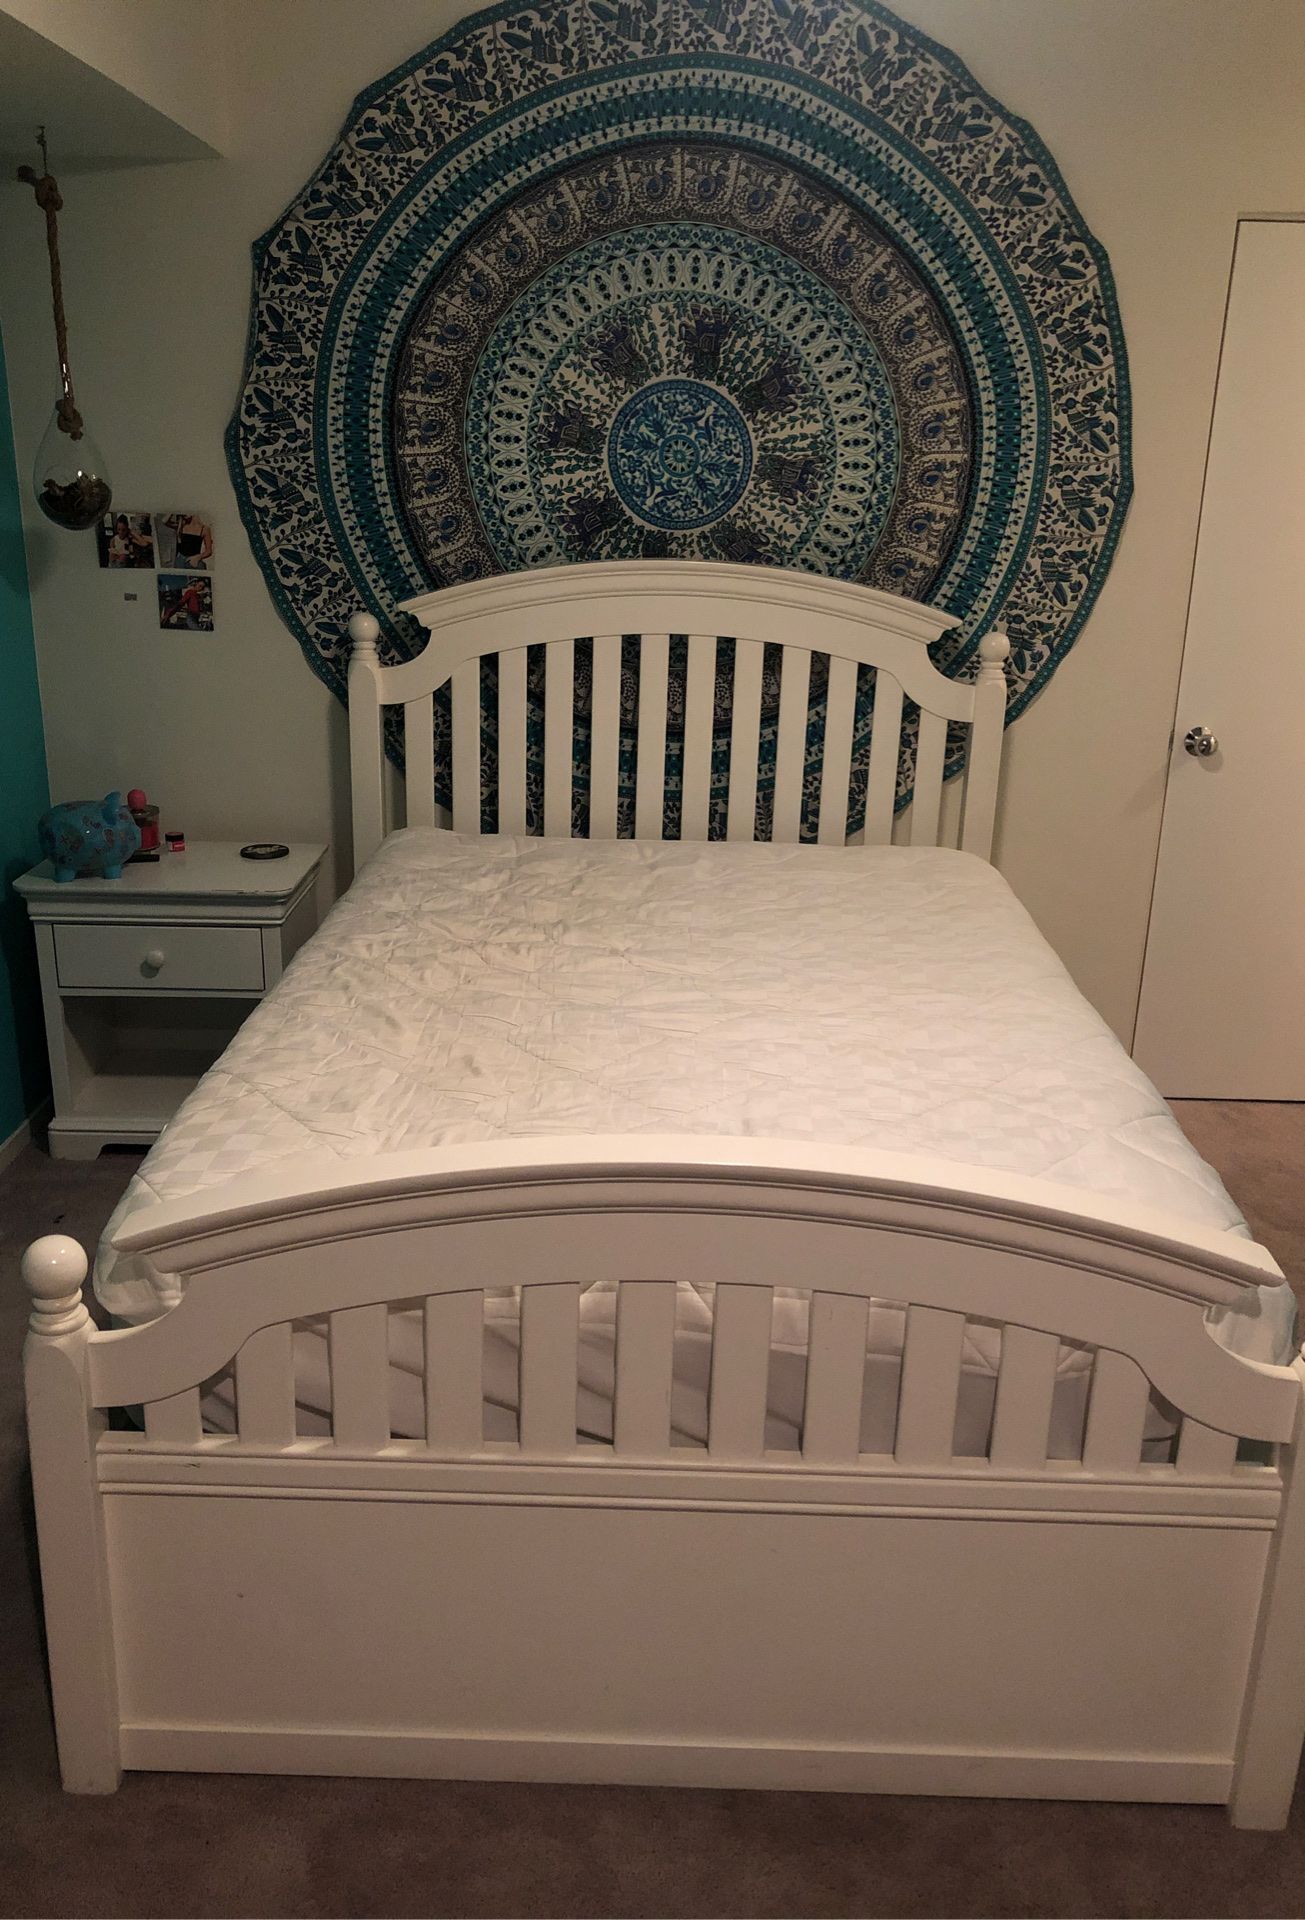 Full bed frame with box spring, mattress, dresser and side table